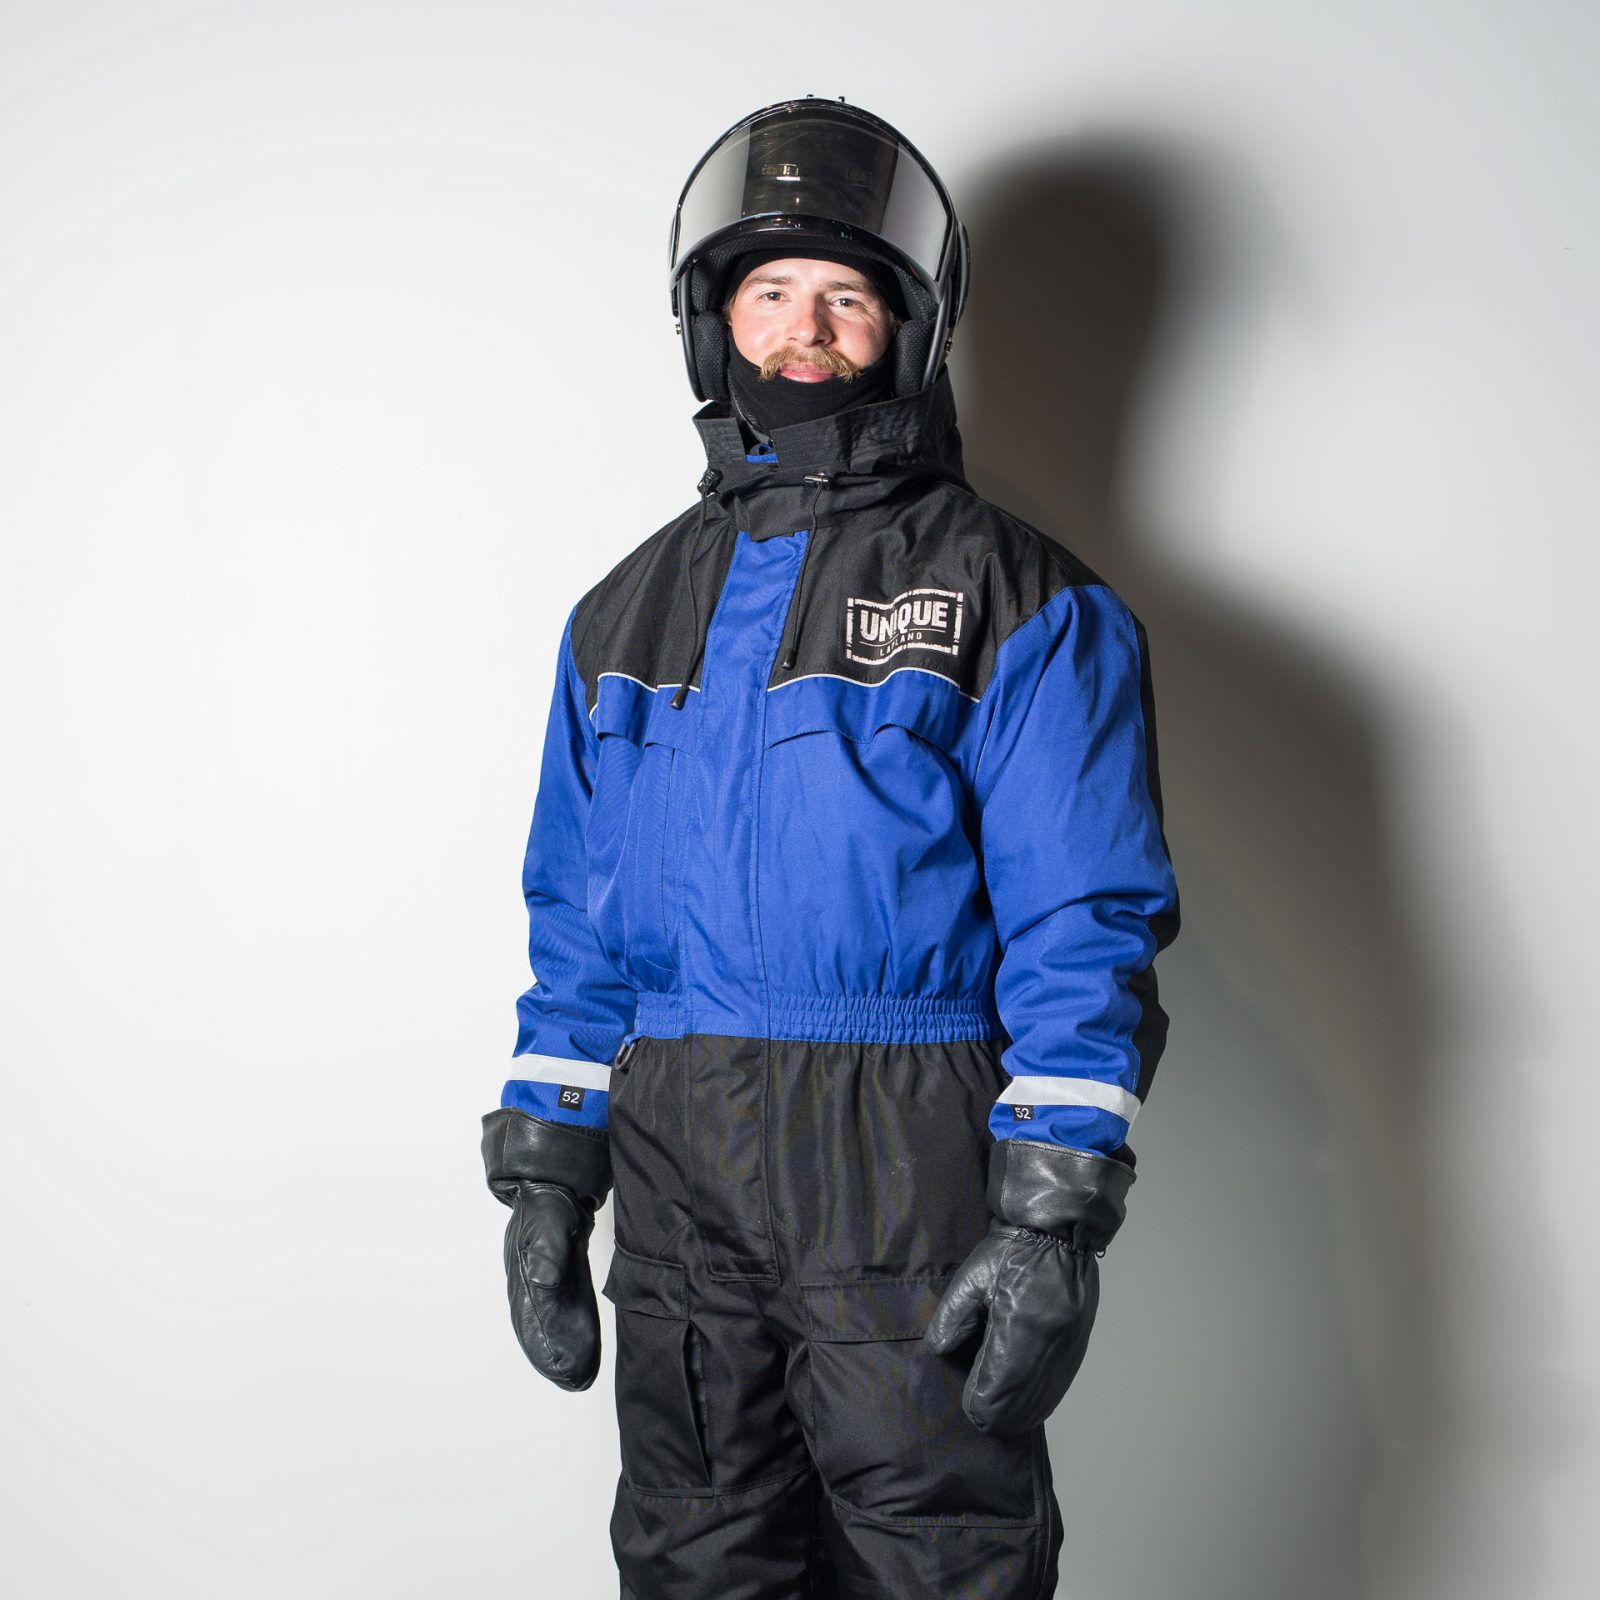 Man wearing winter overall suit with snowmobile helmet